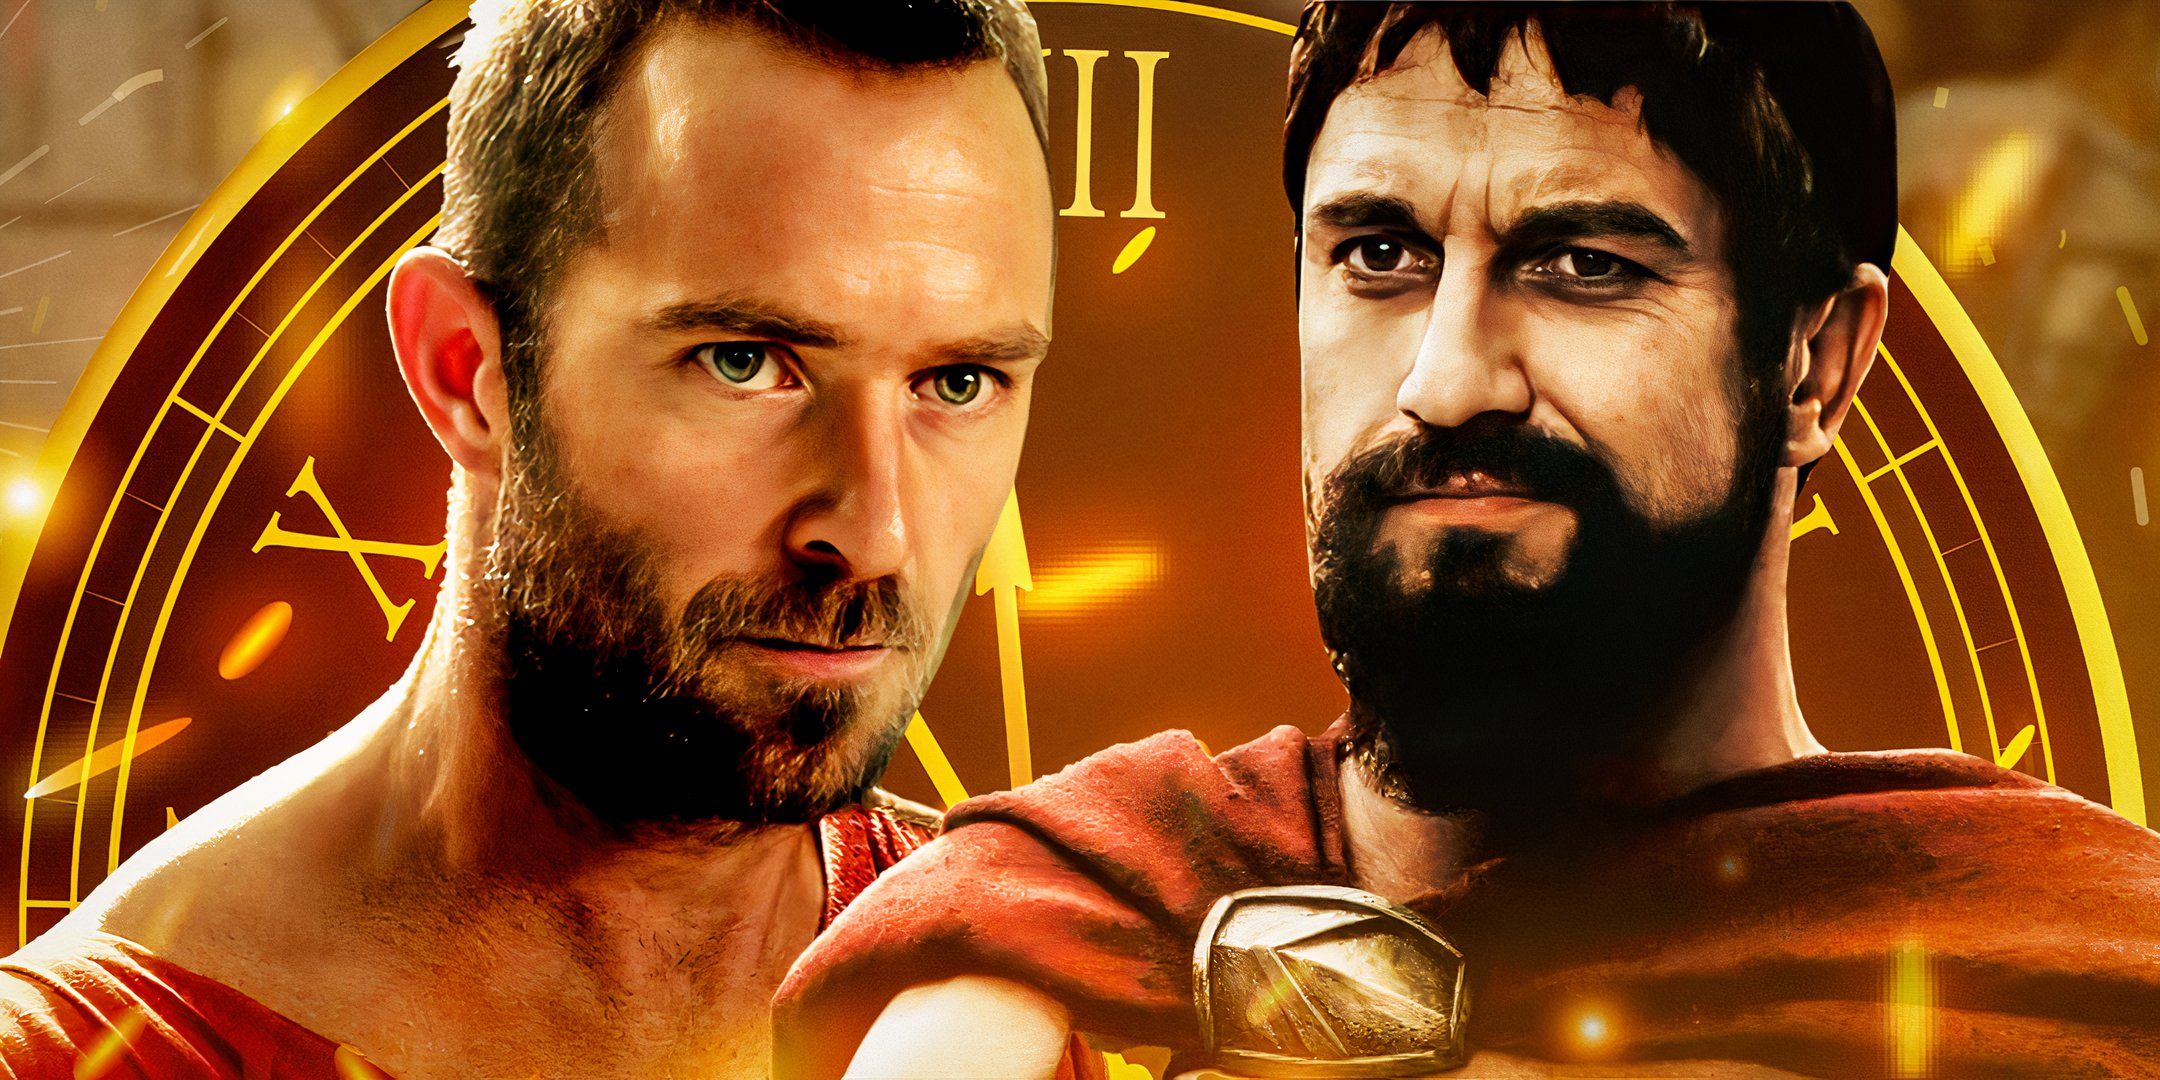 Sullivan Stapleton as Themistokles from 300 Rise of an Empire and Gerard Butler as King Leonidas from 300